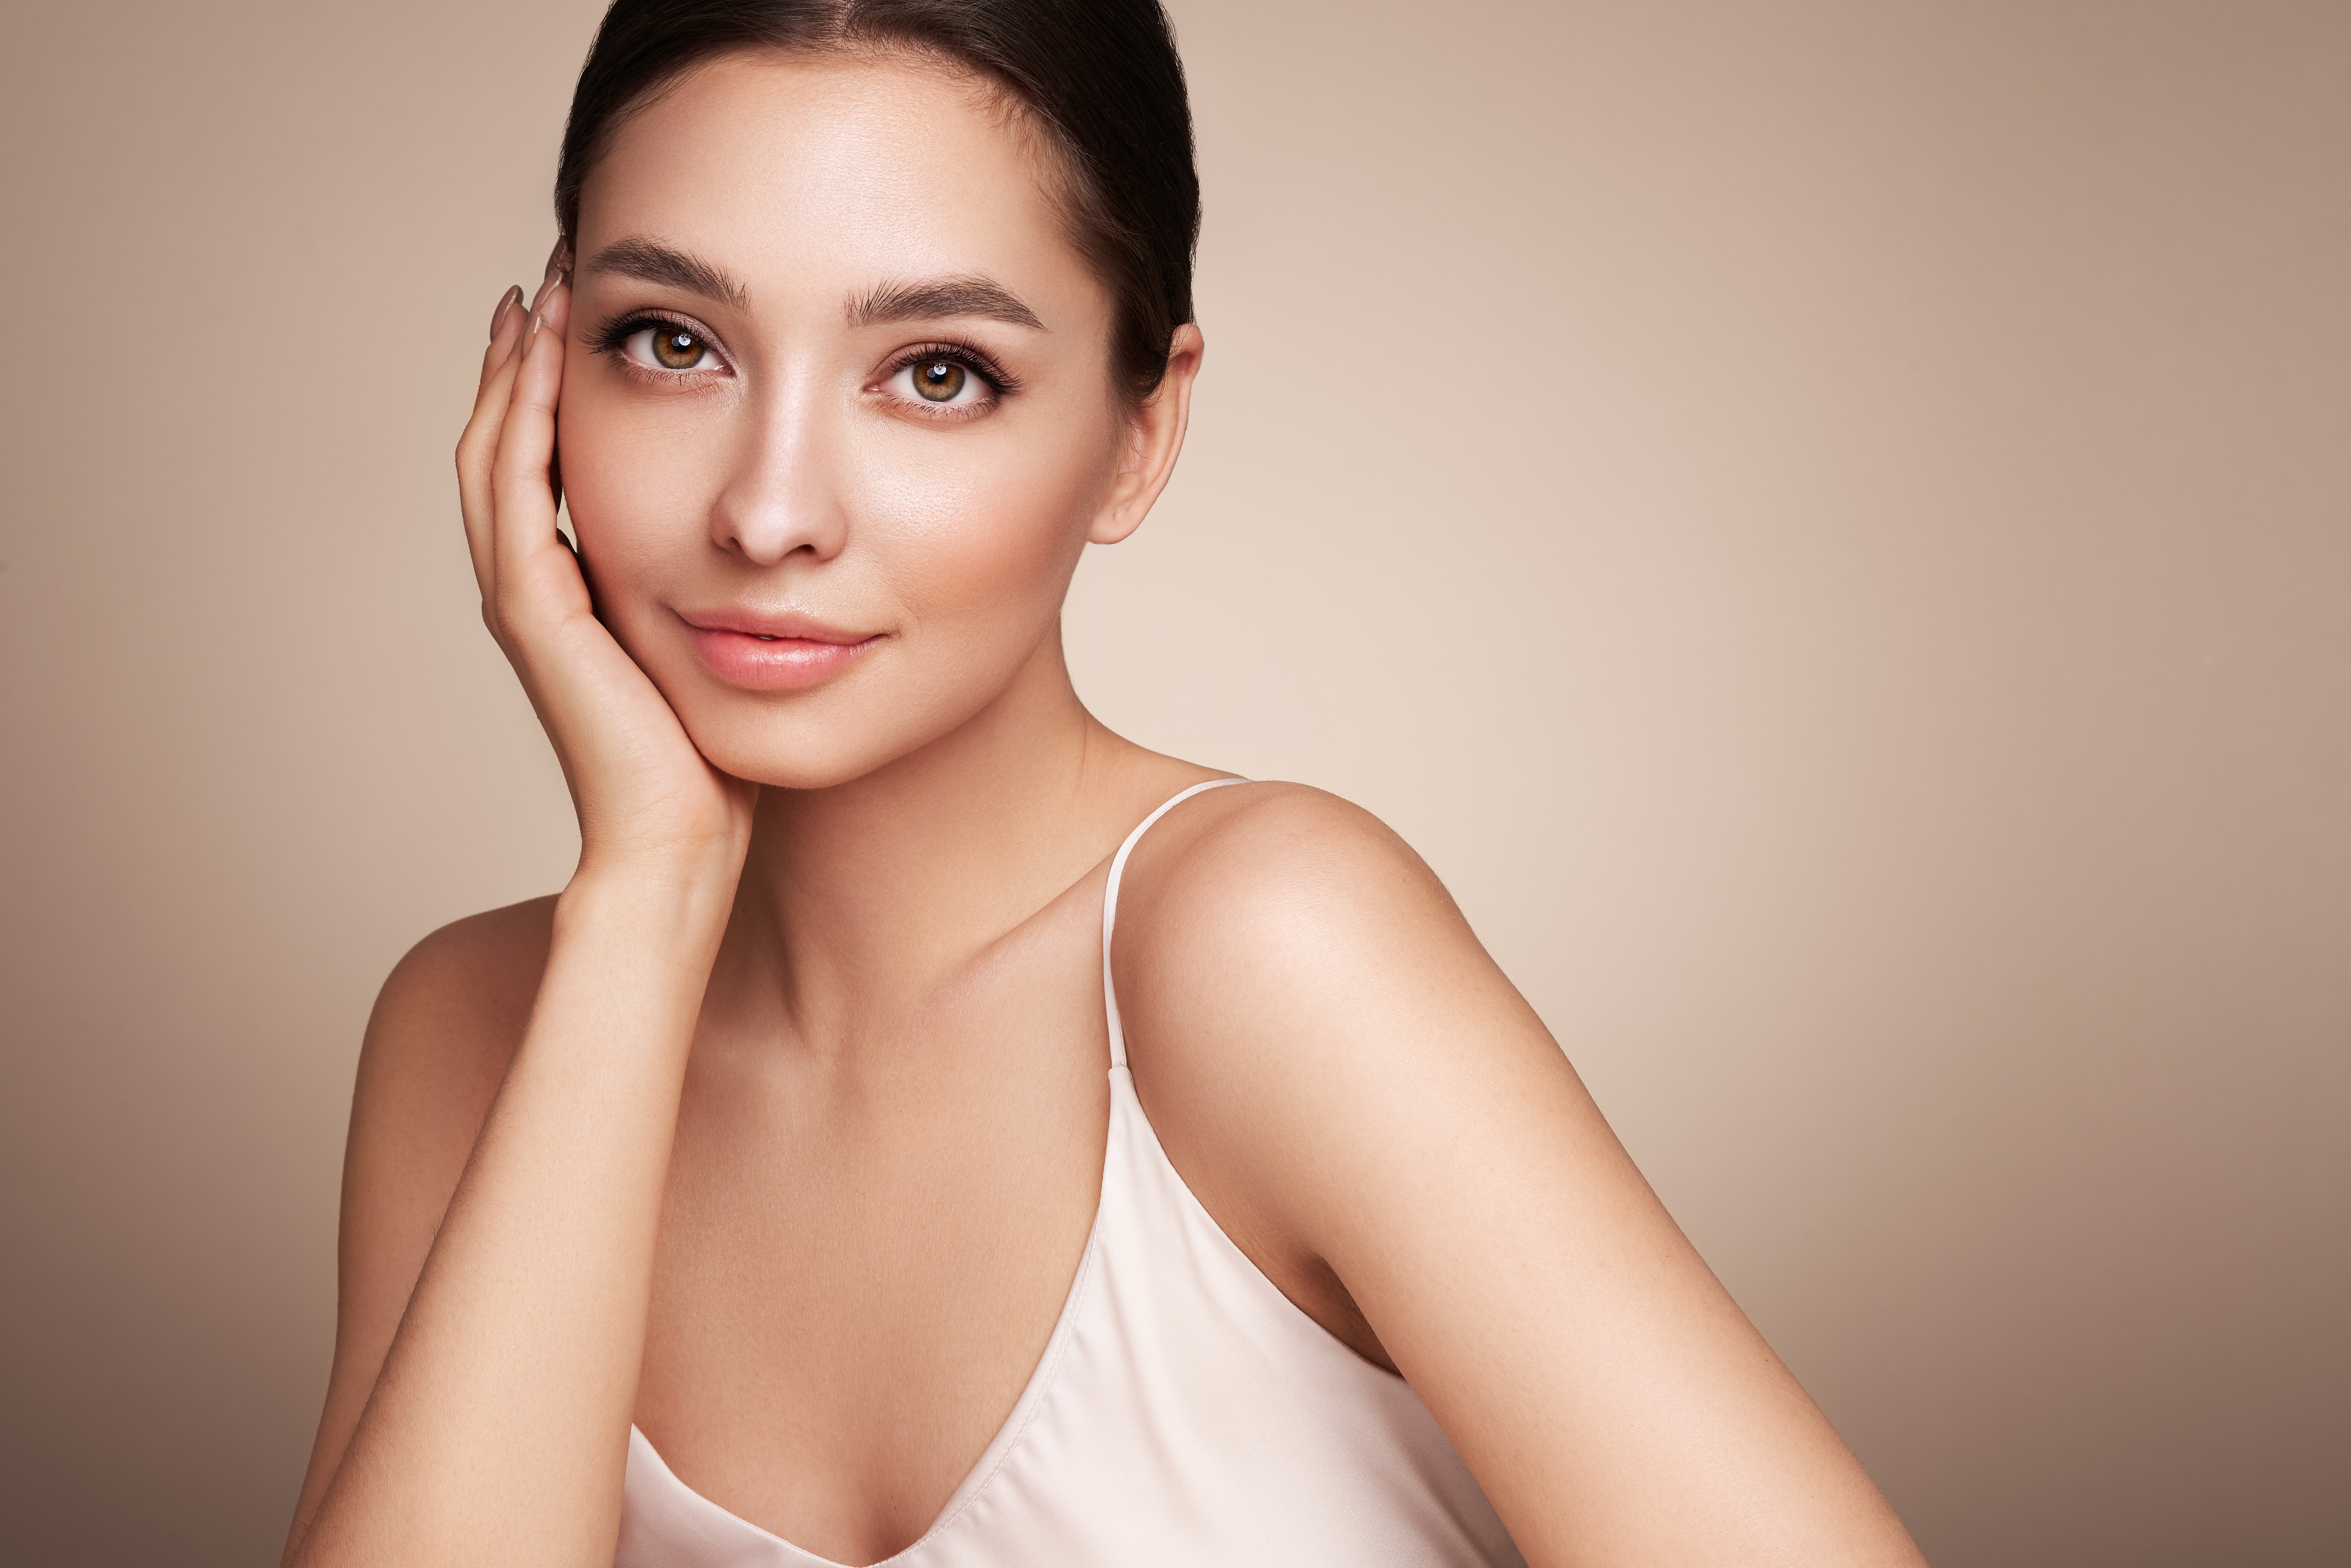 Revive Your Radiance: Non-Surgical Solutions for an Ageless Appearance